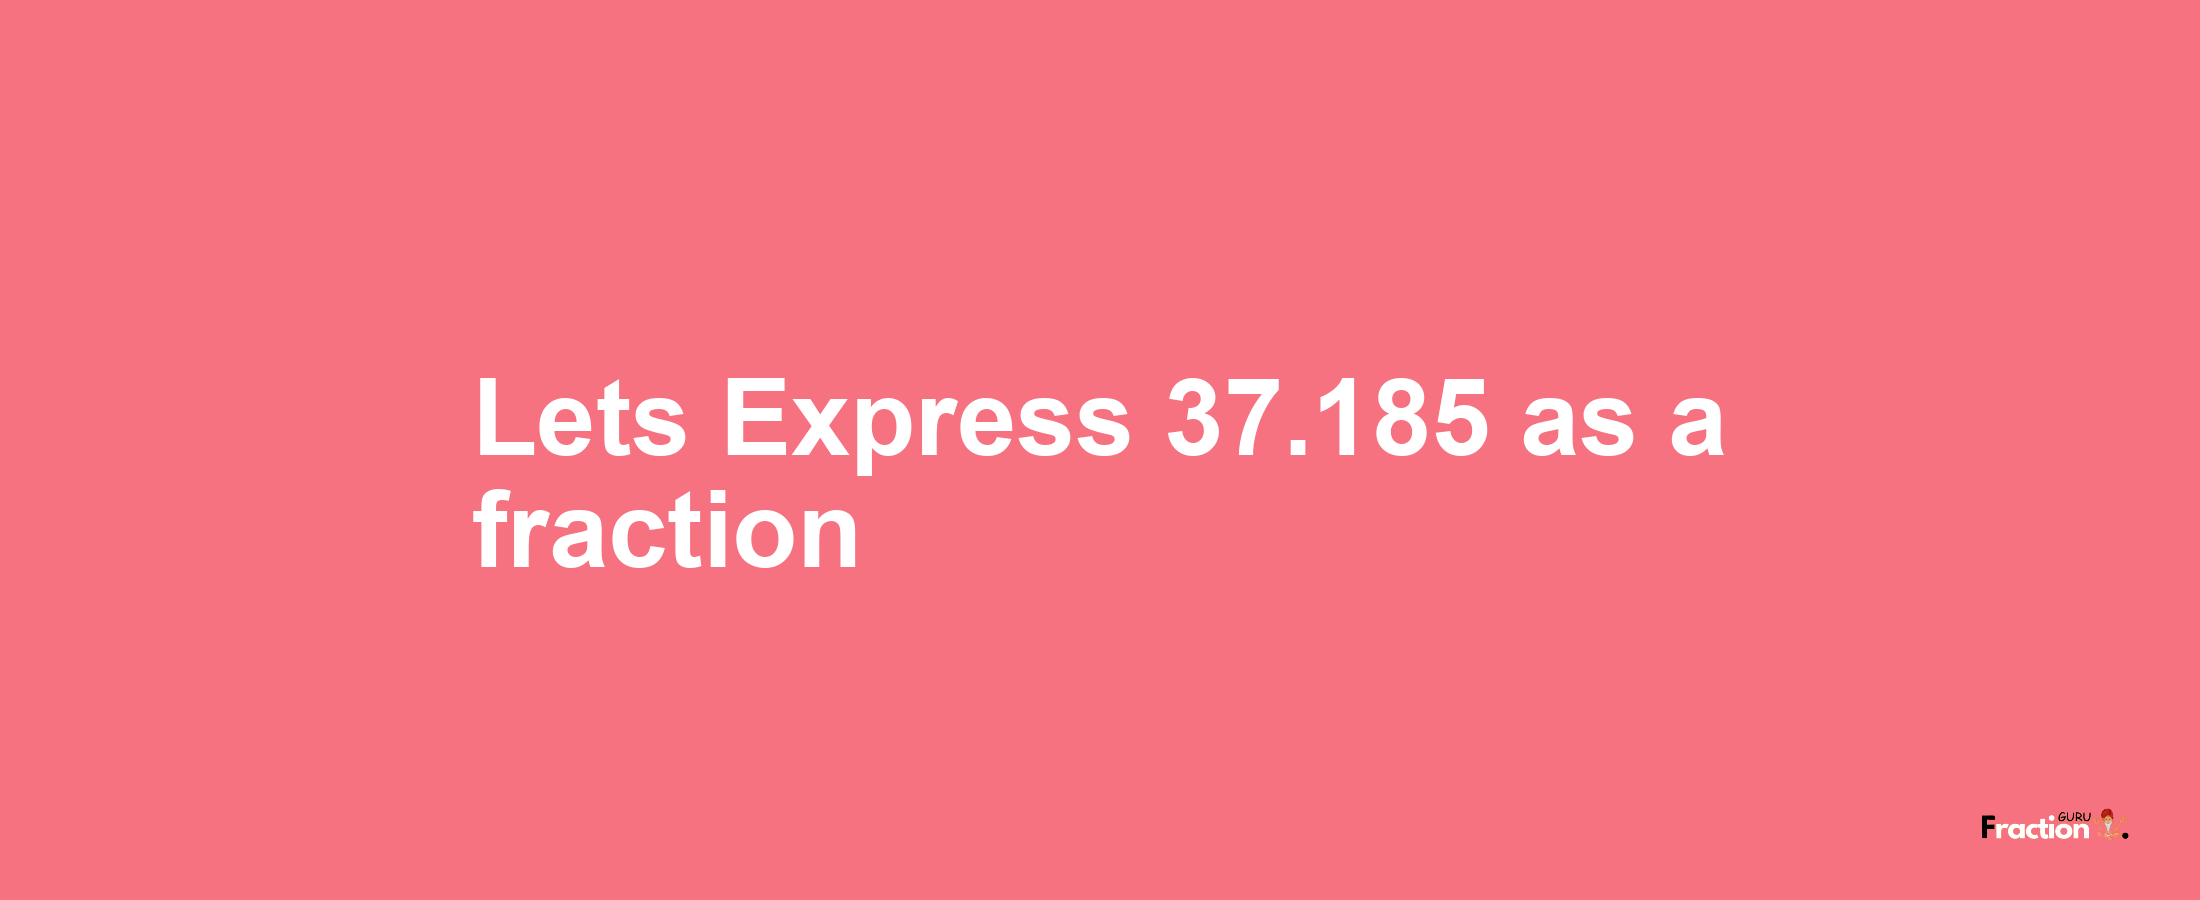 Lets Express 37.185 as afraction